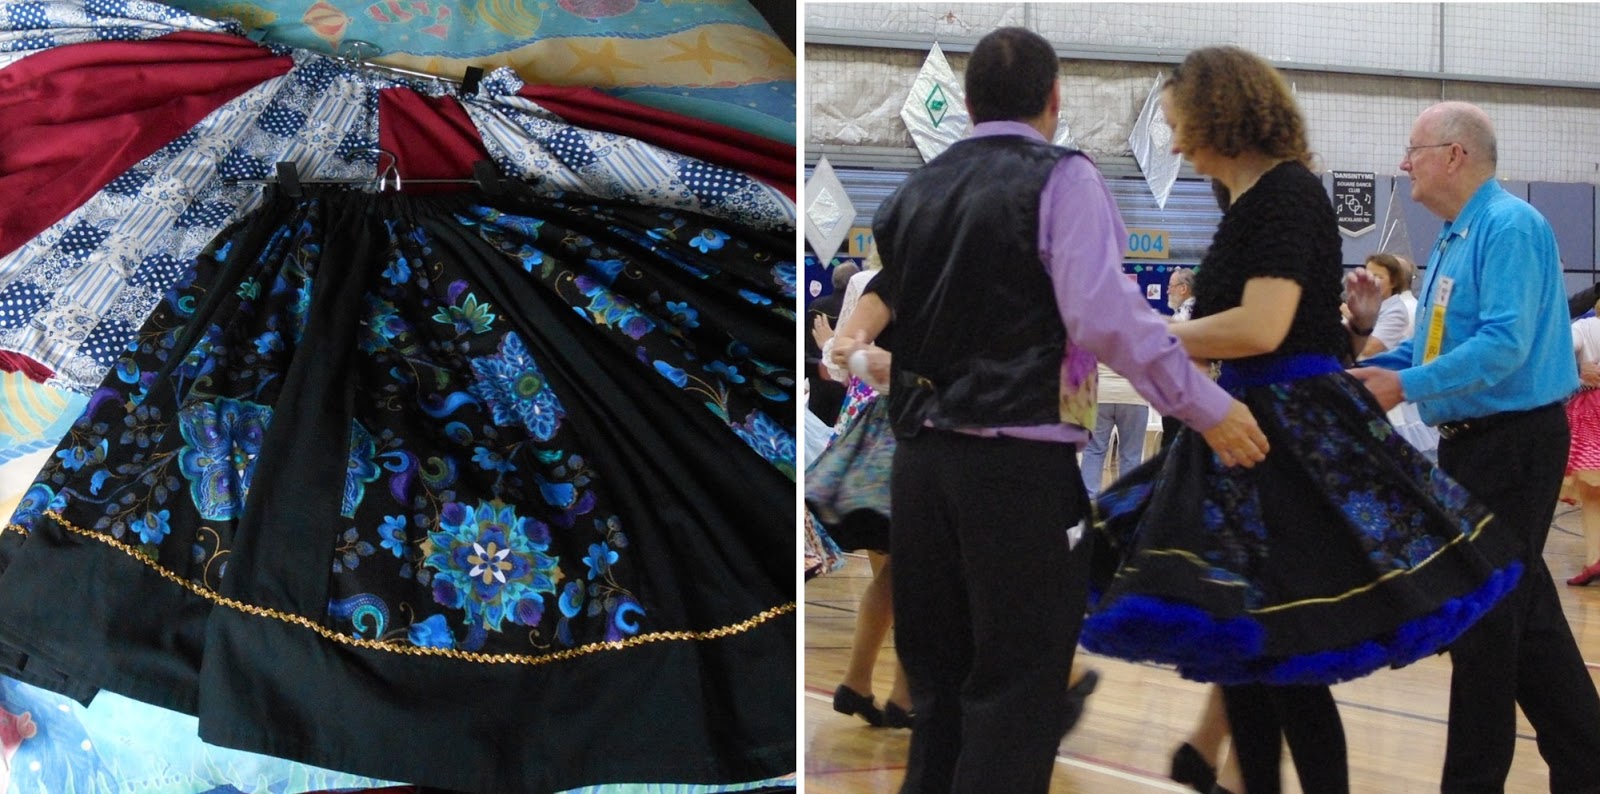 What do you wear for square dancing? - Quora